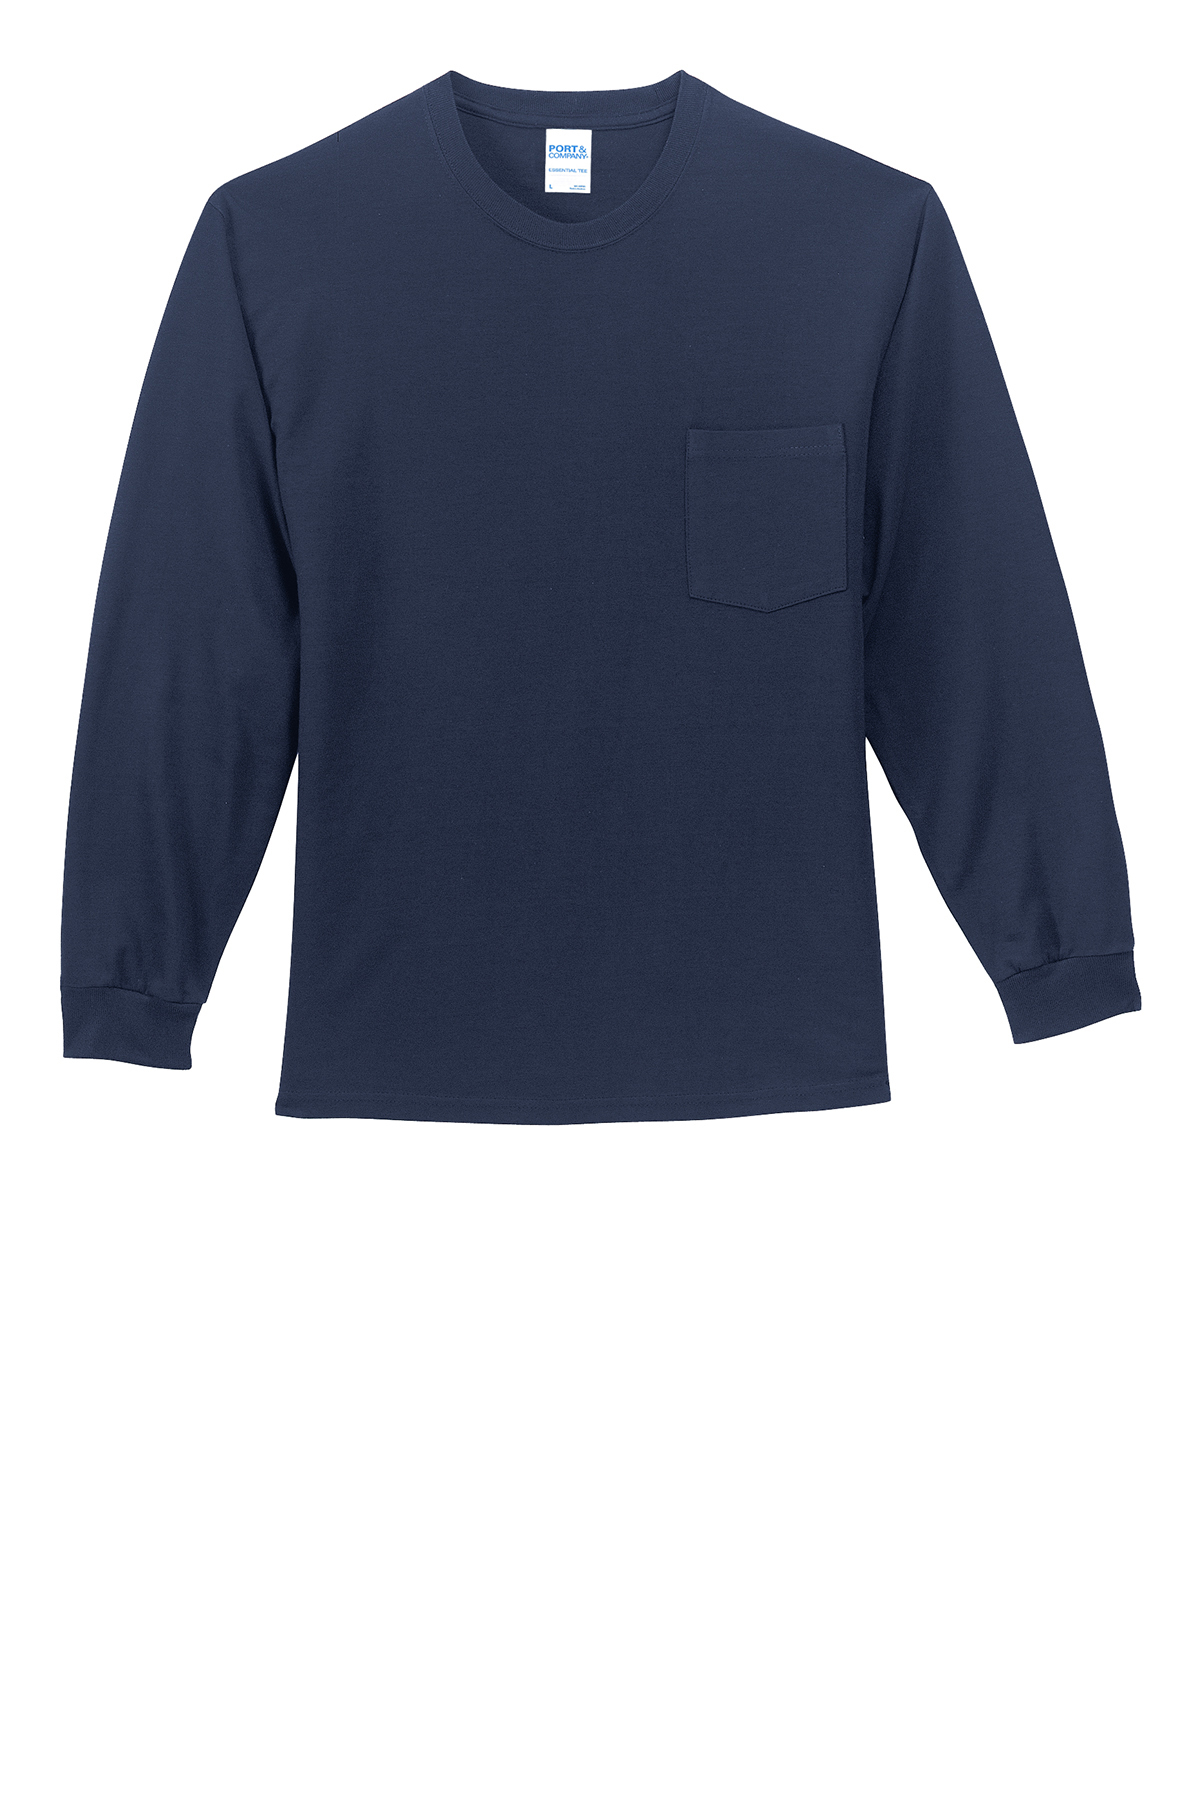 PC61LSP Port & Company Long Sleeve Essential Pocket Tee 